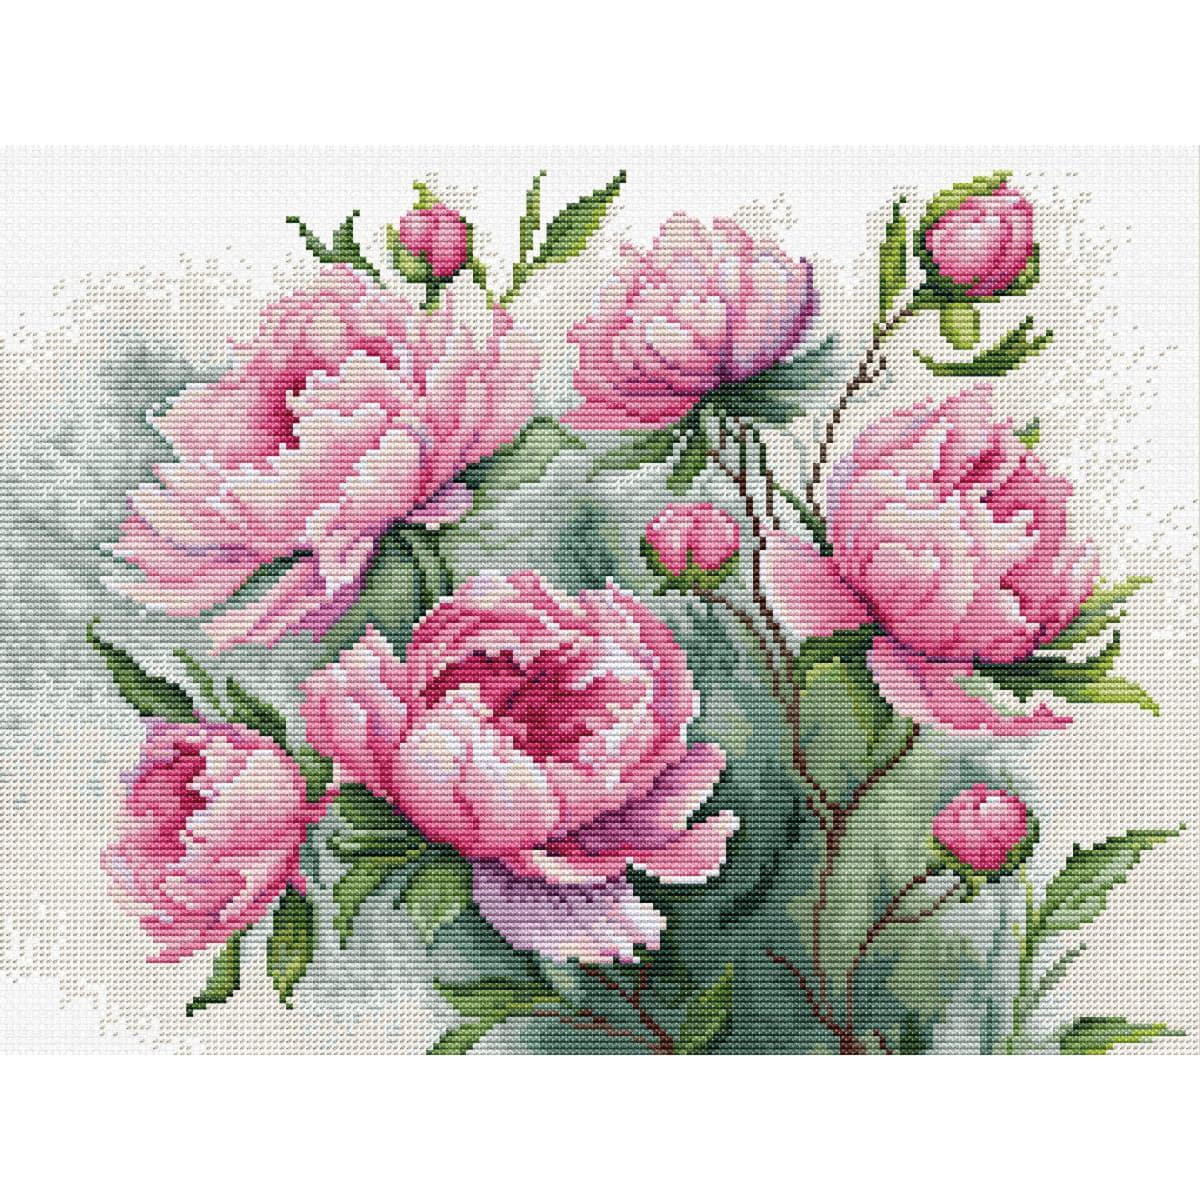 A detailed cross stitch design depicting a bouquet of...